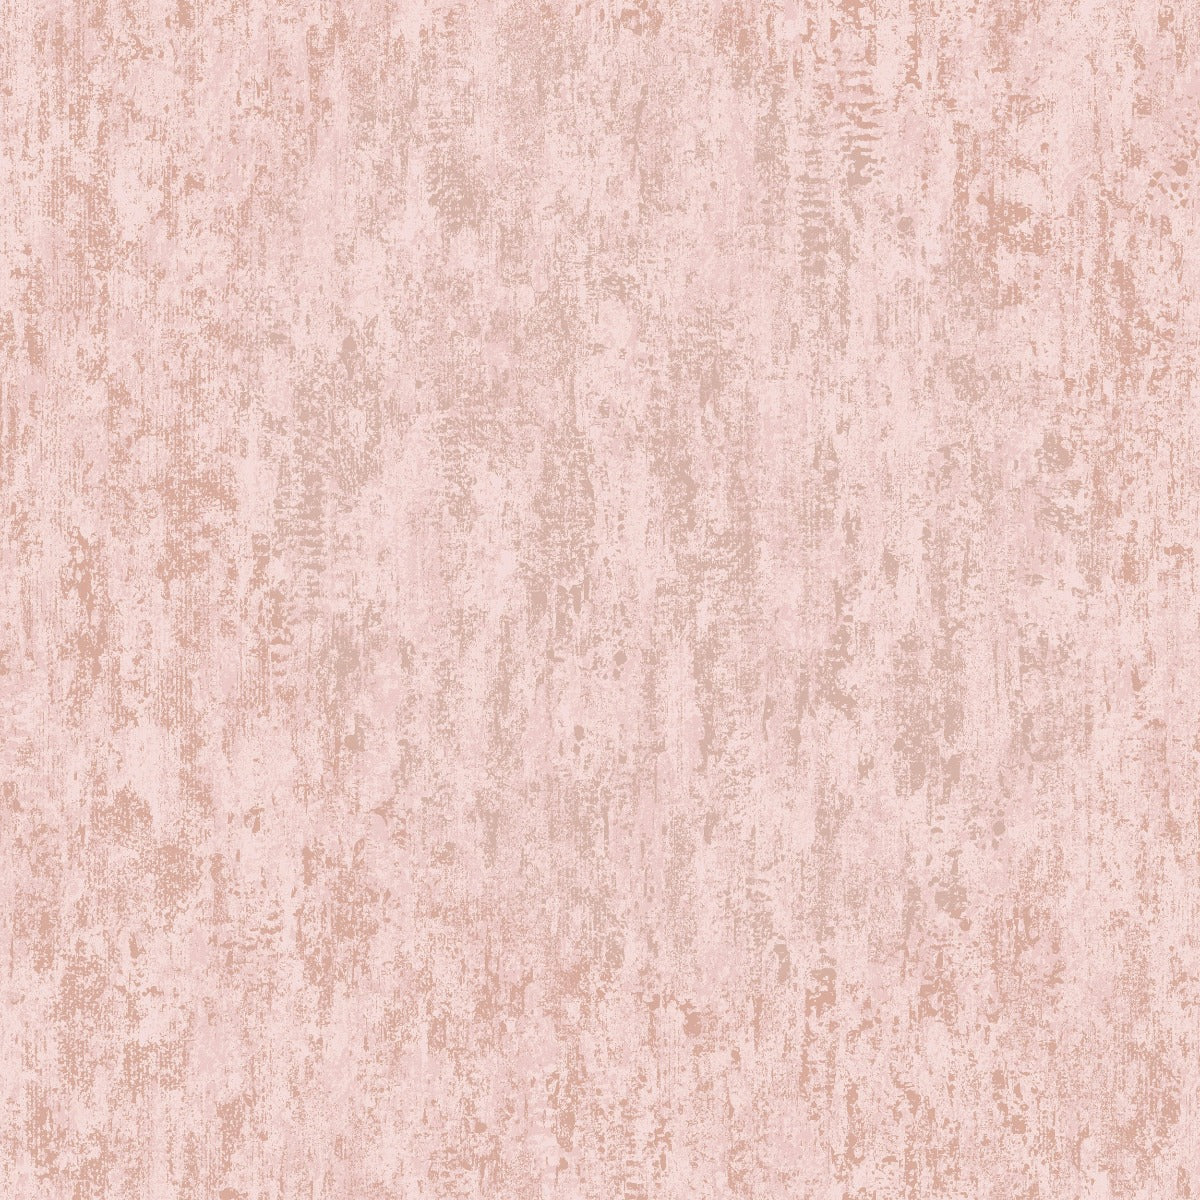 Marble Blush Pink Wallpaper By Woodchip  Magnolia